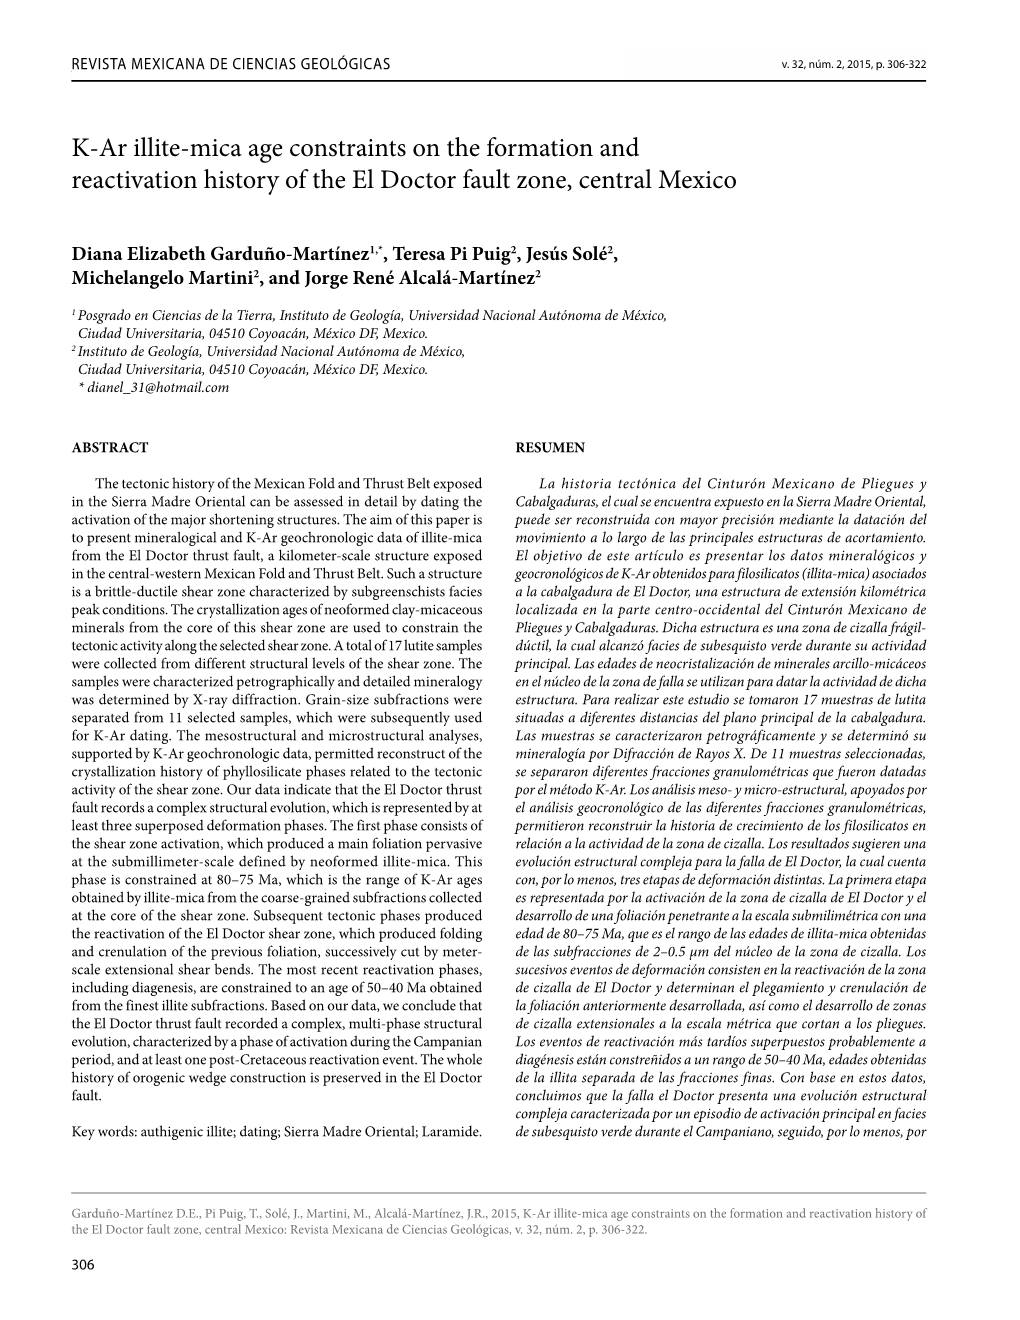 K-Ar Illite-Mica Age Constraints on the Formation and Reactivation History of the El Doctor Fault Zone, Central Mexico